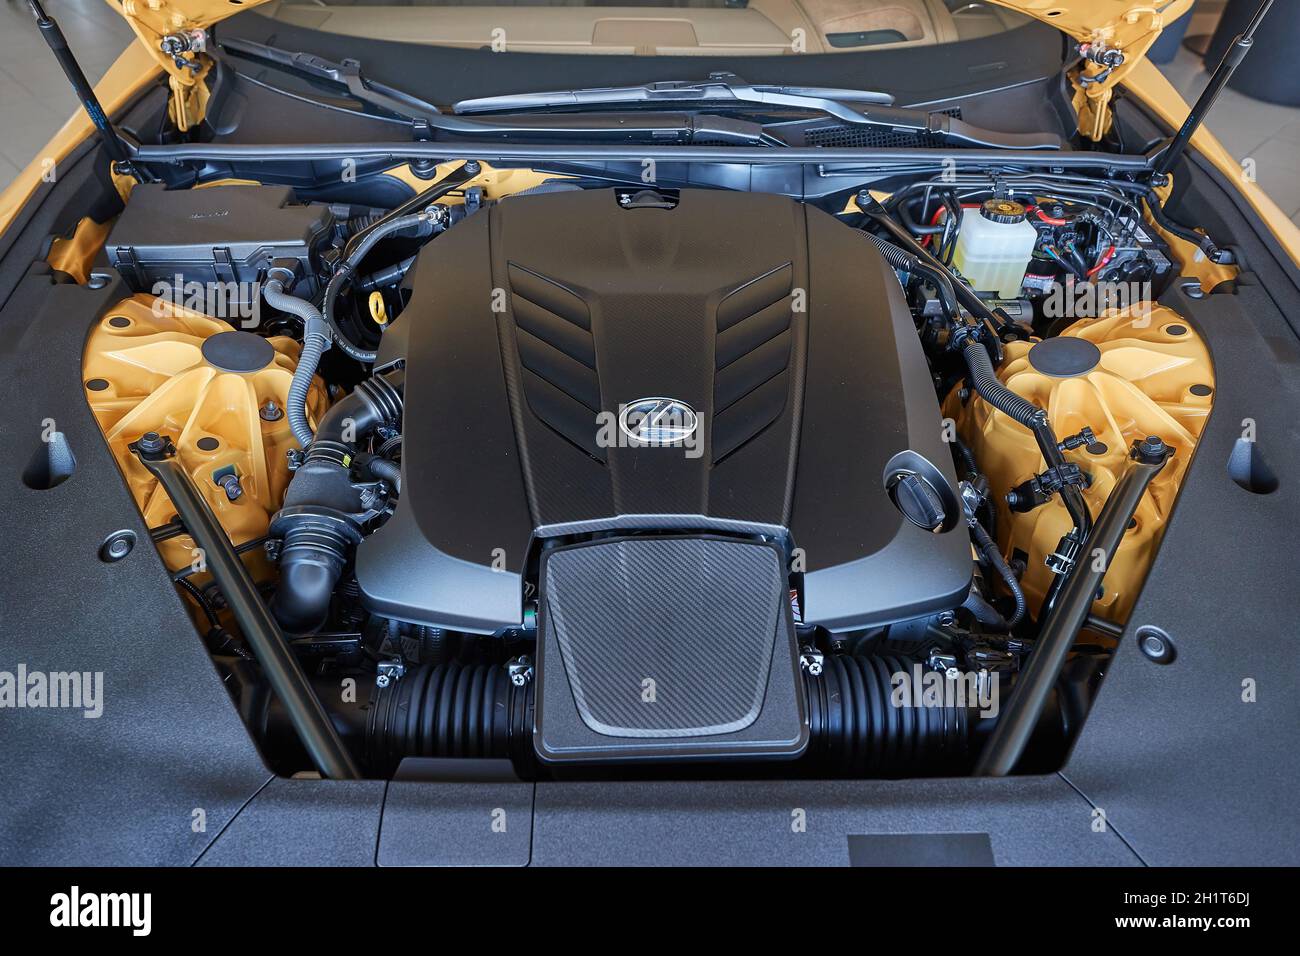 BUDAPEST, HUNGARY - CIRCA 2020: Engine bay of a Lexus LC 500 convertible sports coupe with a naturally aspirated V8 engine producing 471 horsepower Stock Photo